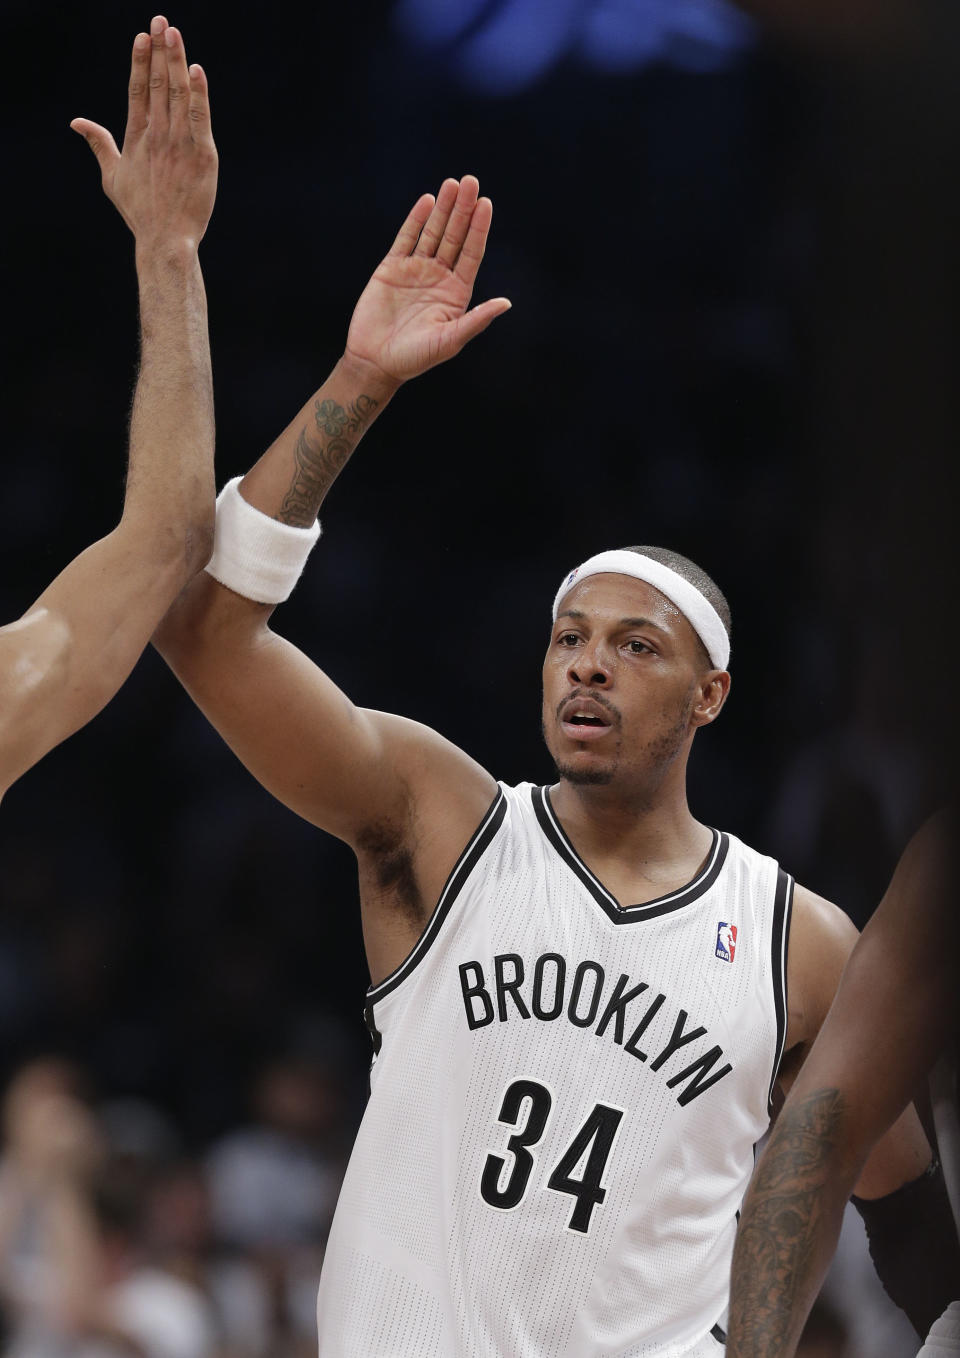 Brooklyn Nets forward Paul Pierce (34) celebrates with teammates after scoring against the Miami Heat in the fourth quarter during Game 3 of an Eastern Conference semifinal NBA playoff basketball game on Saturday, May 10, 2014, in New York. The Nets won 104-90. (AP Photo/Julie Jacobson)